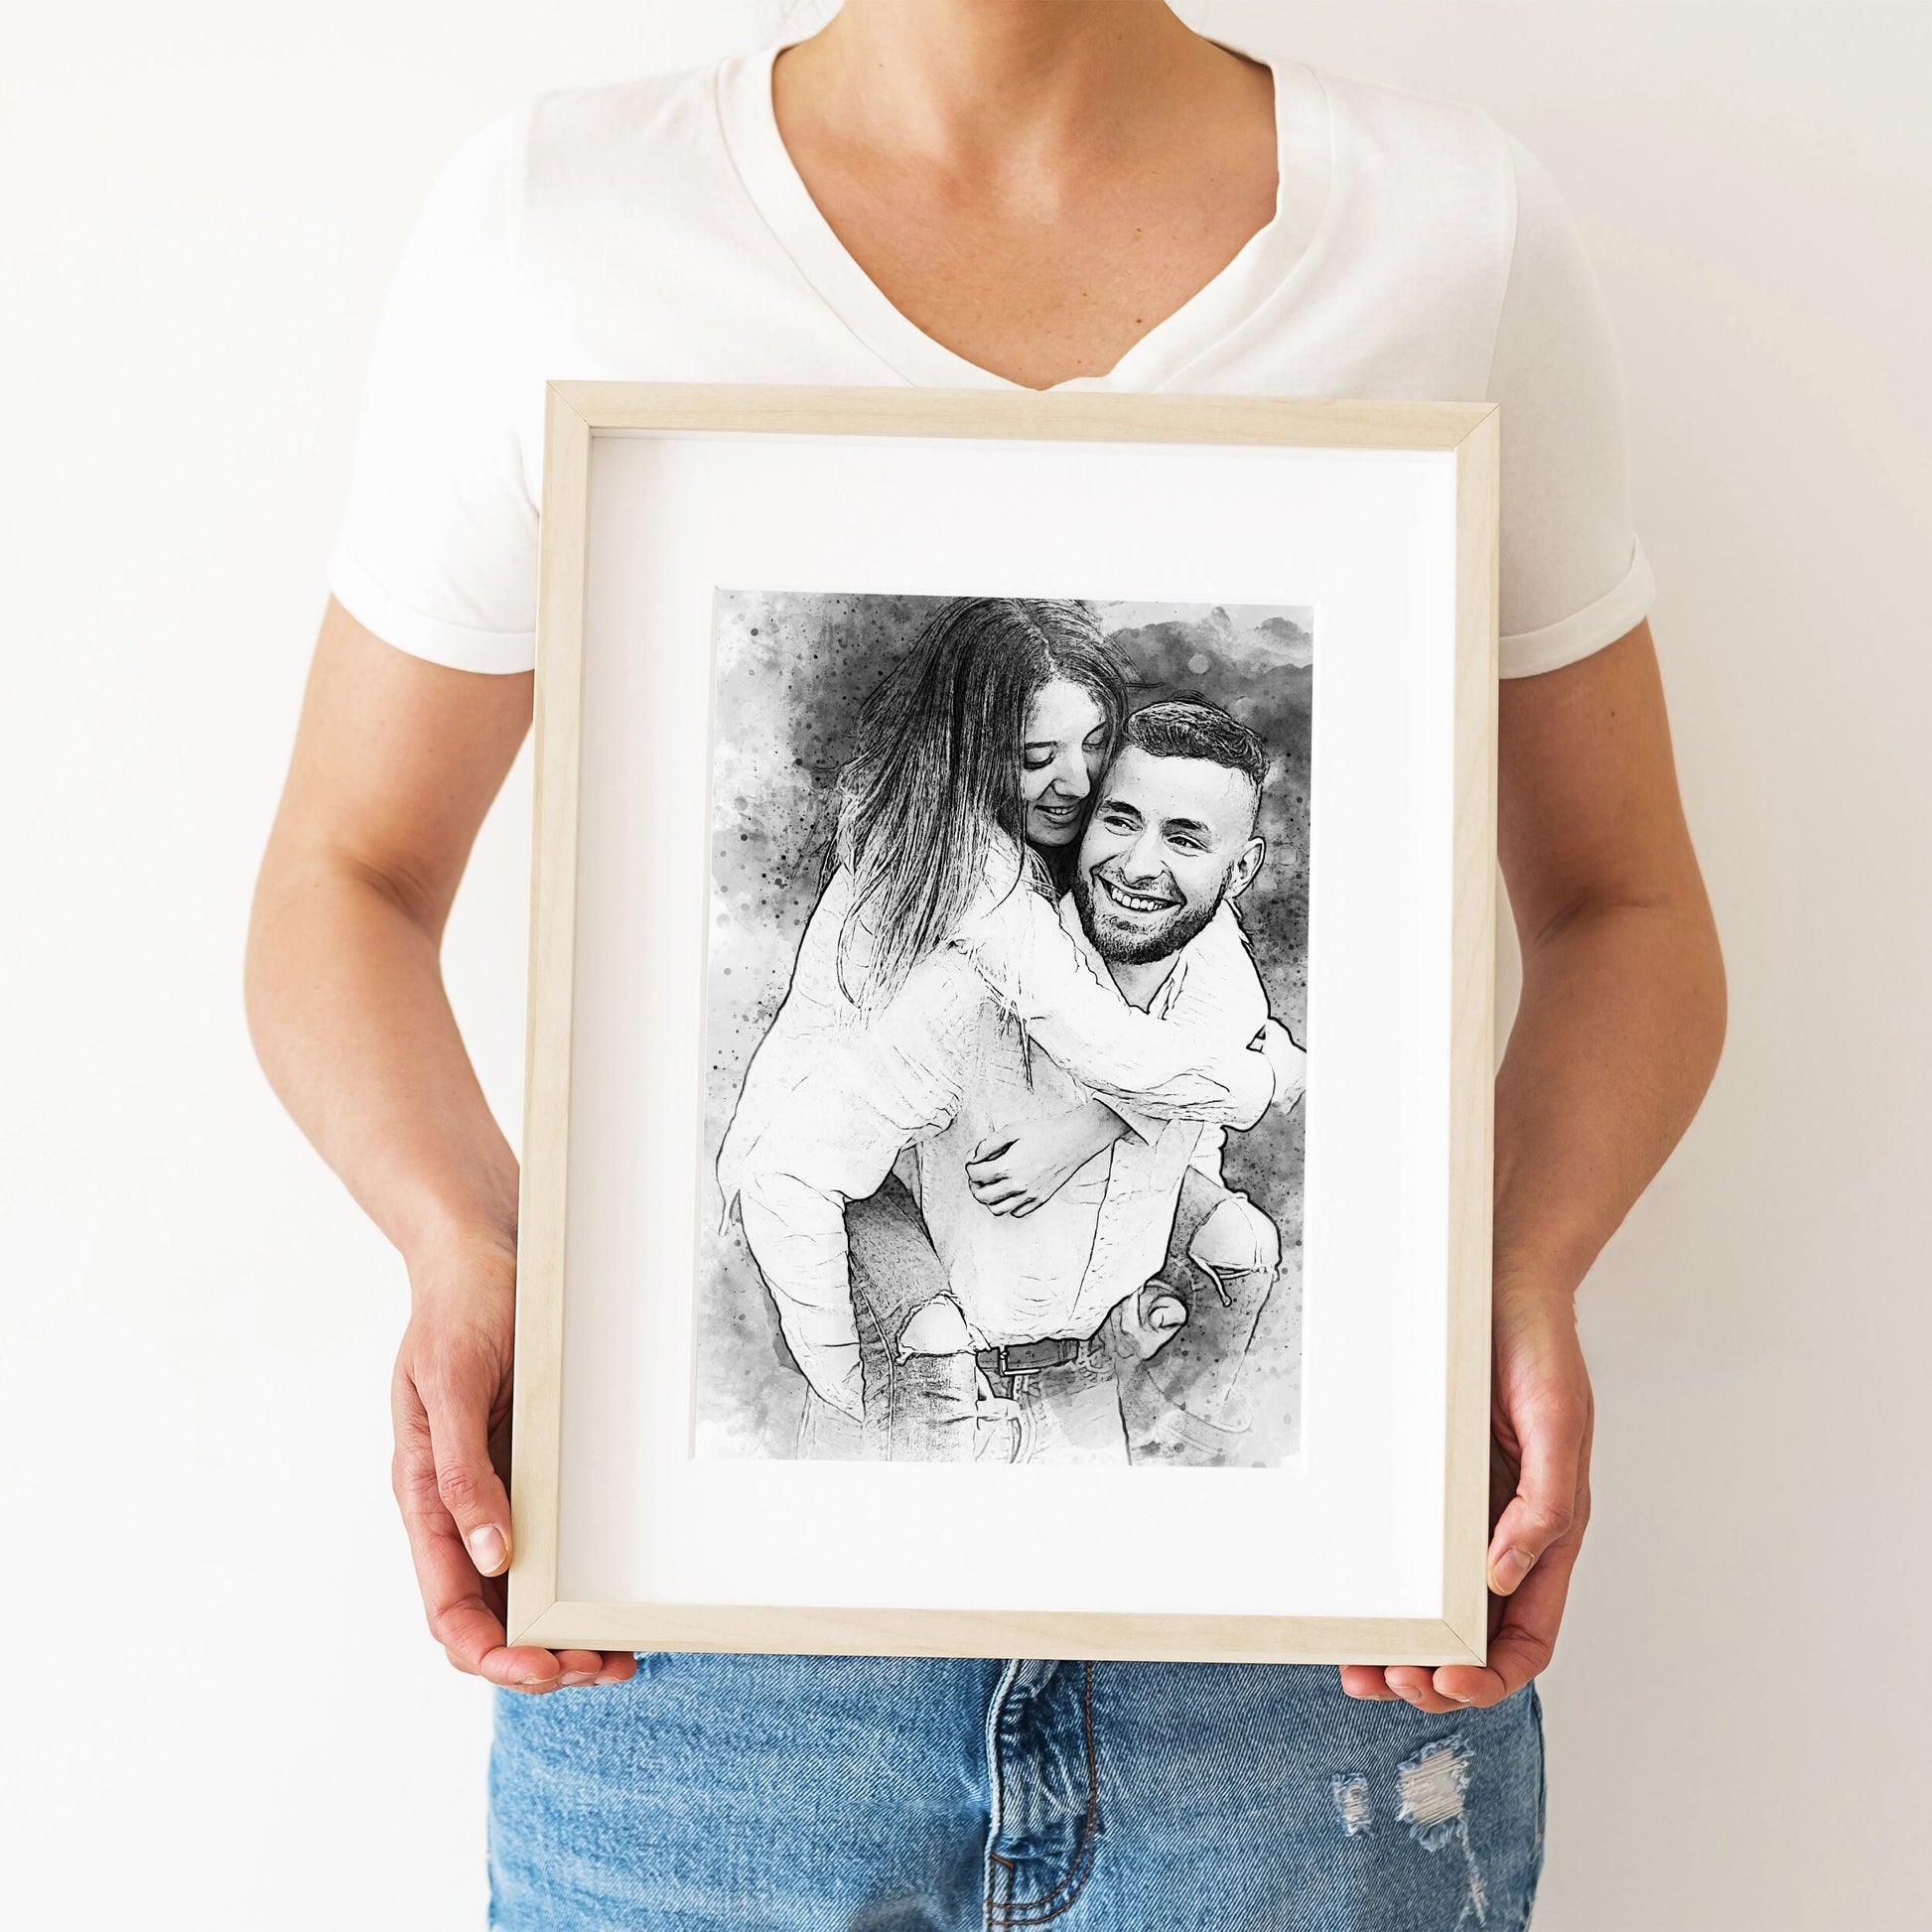 Custom Portrait, Wedding Gift, Anniversary Gifts, Personalized, Couple Portrait, Gift for Her, Gift for Him, Cotton Anniversary Gifts